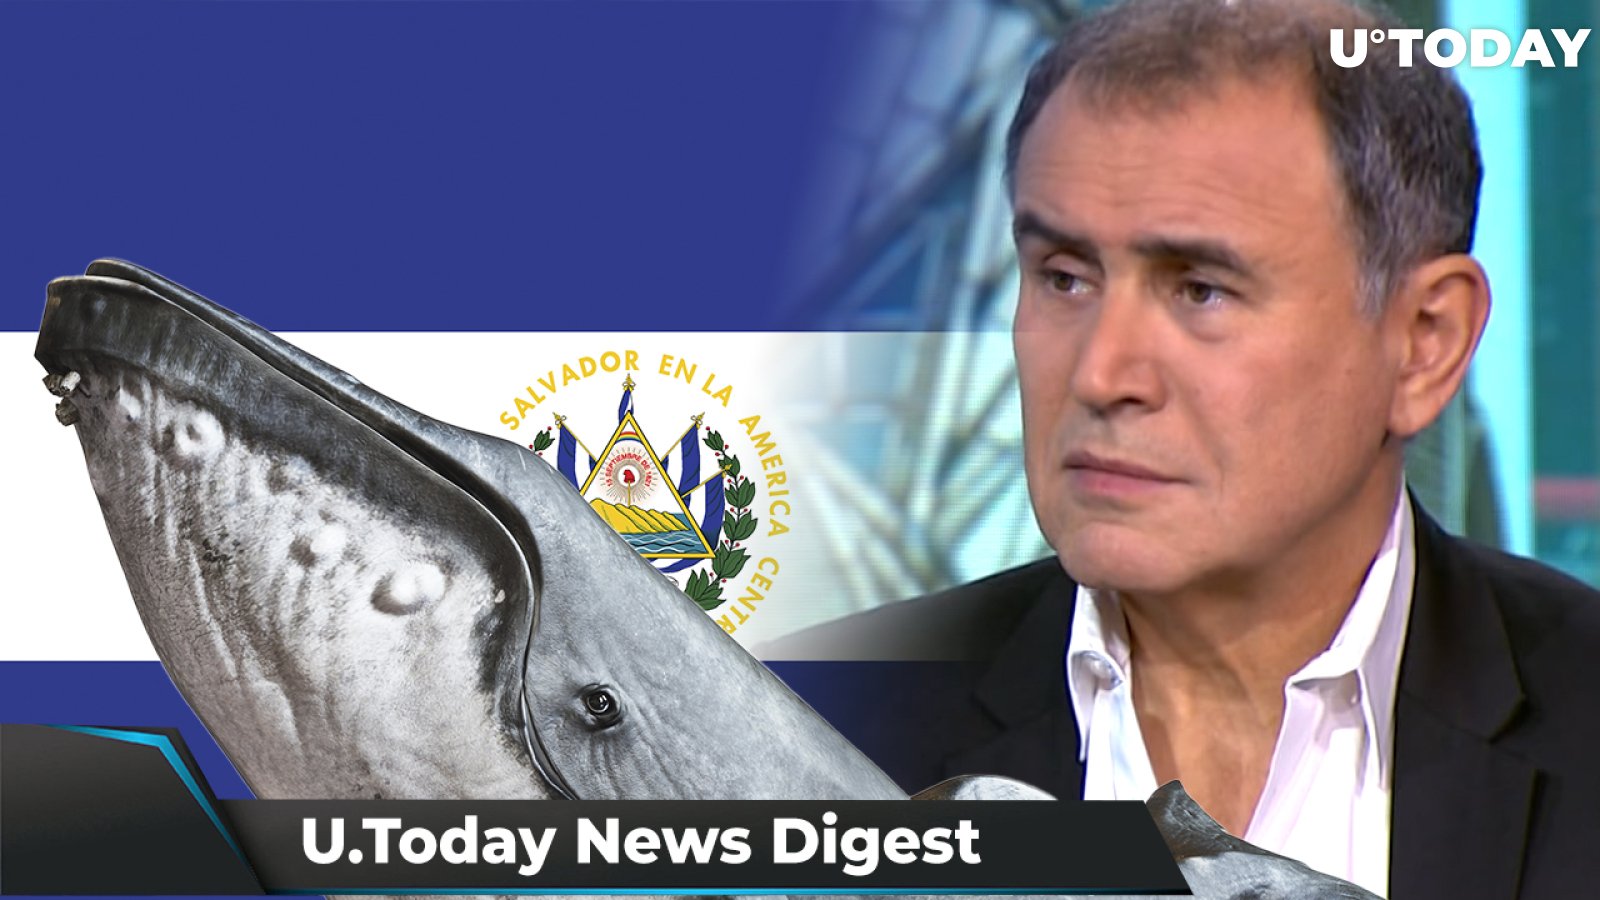 Nouriel Roubini Wants El Salvador President Impeached, ETH Whale Buys 500 Billion SHIB, DOGE Creator Points out Bear Market Sign: Crypto News Digest by U.Today